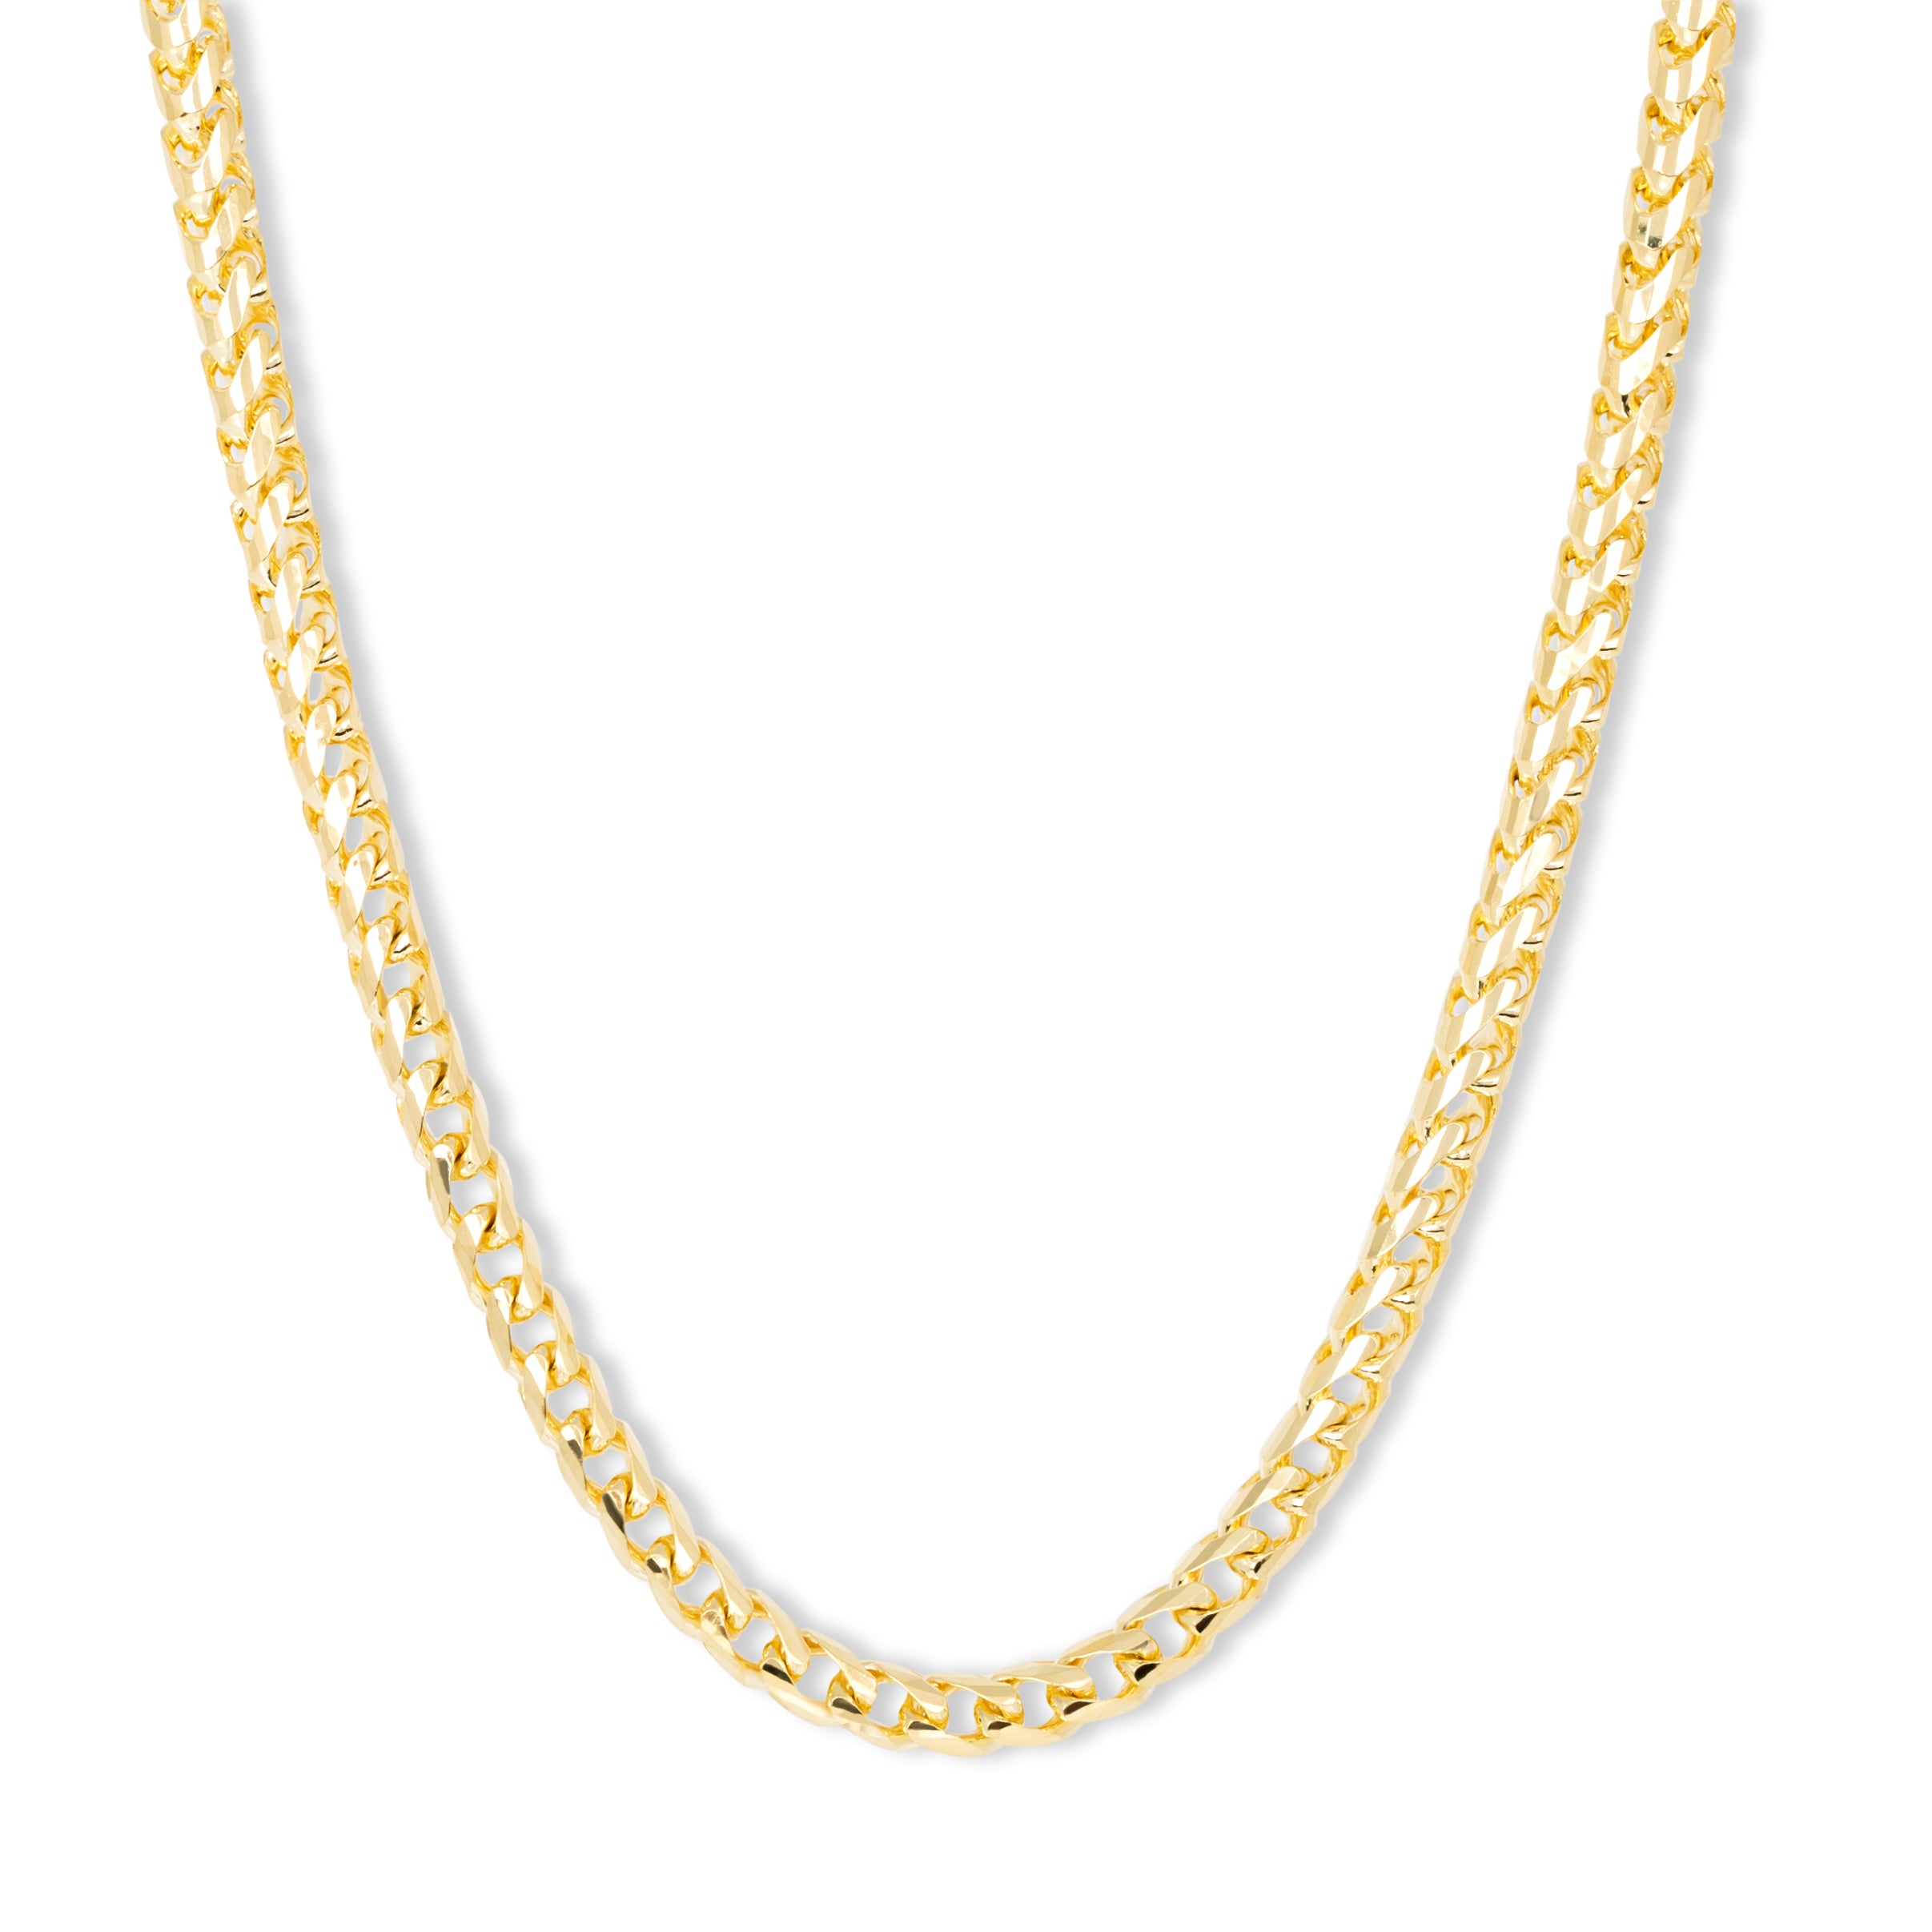 5mm Franco Chain Necklace